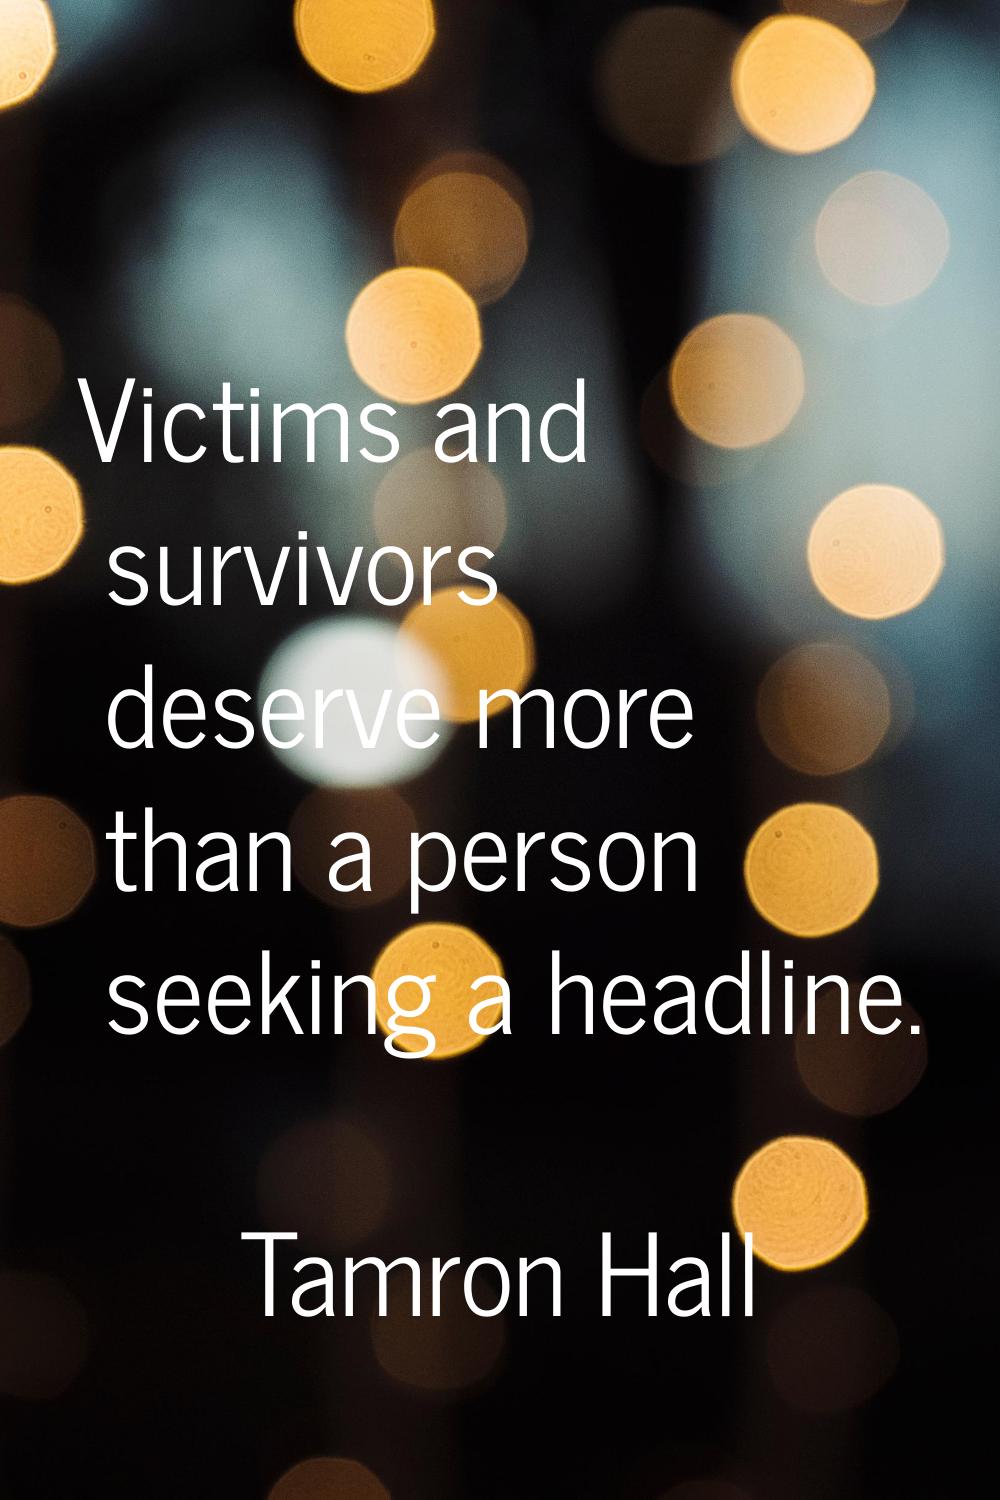 Victims and survivors deserve more than a person seeking a headline.